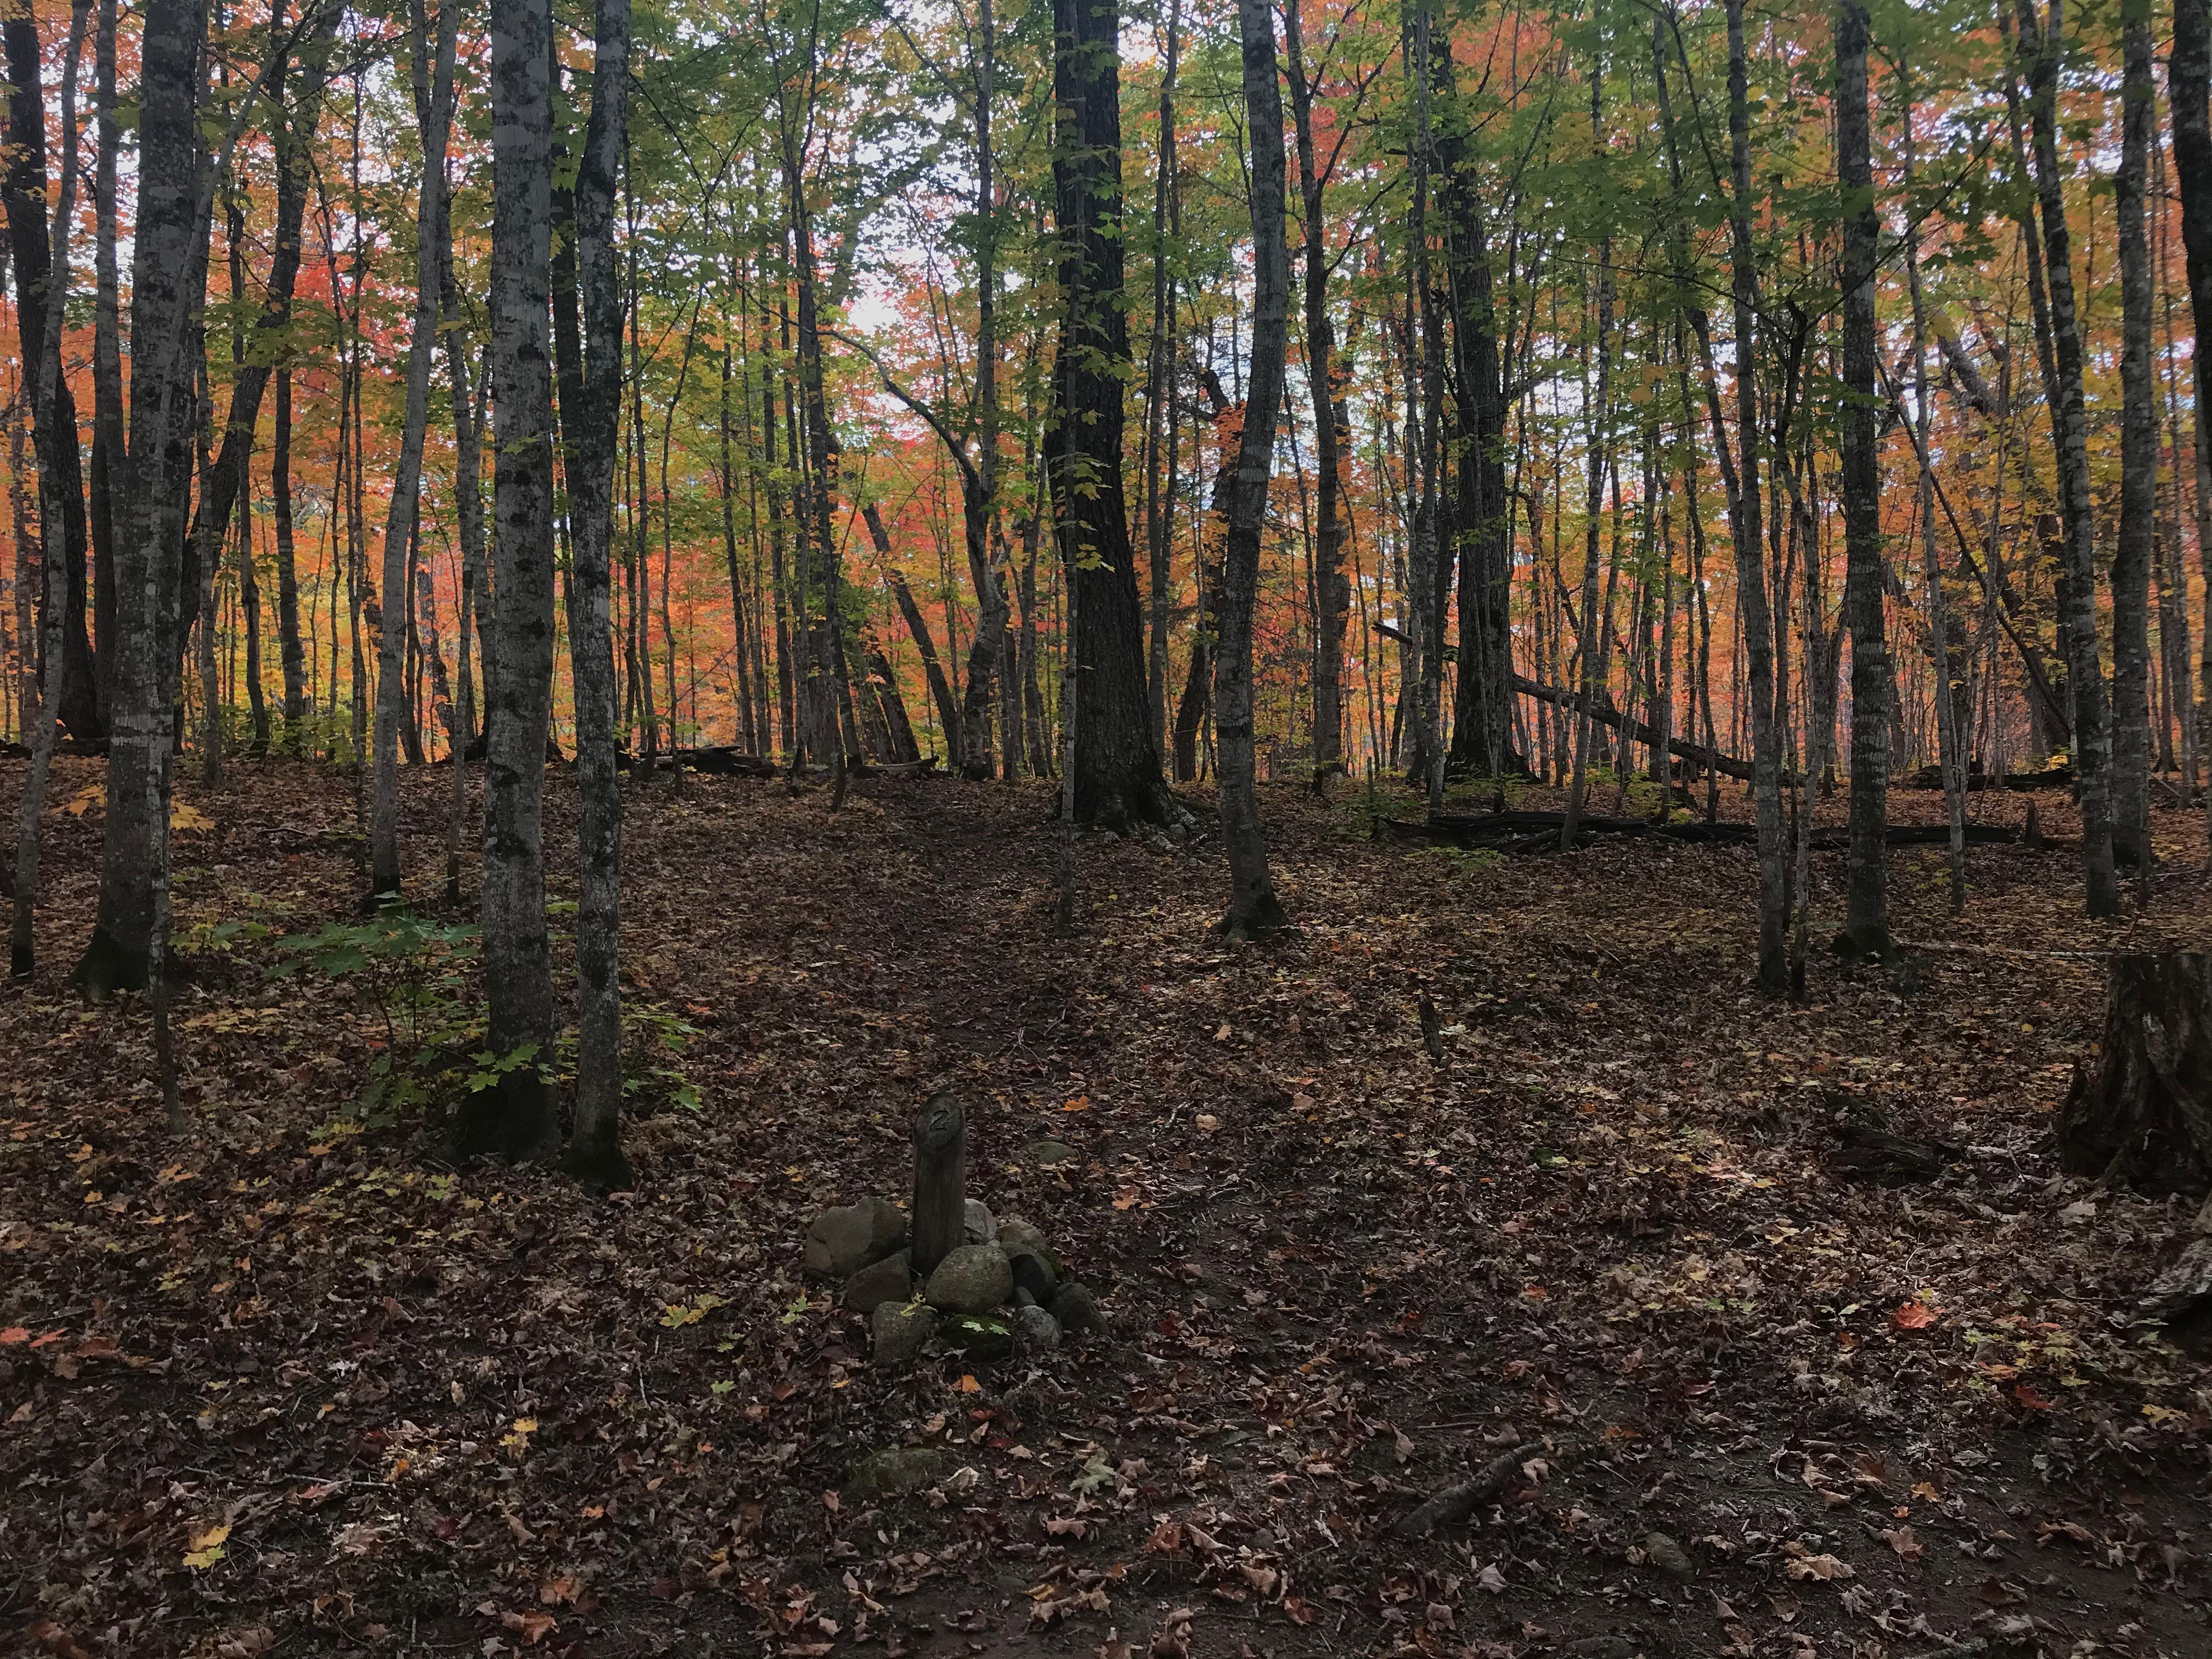 A small clearing covered in leaves surrounded by trees in fall color.